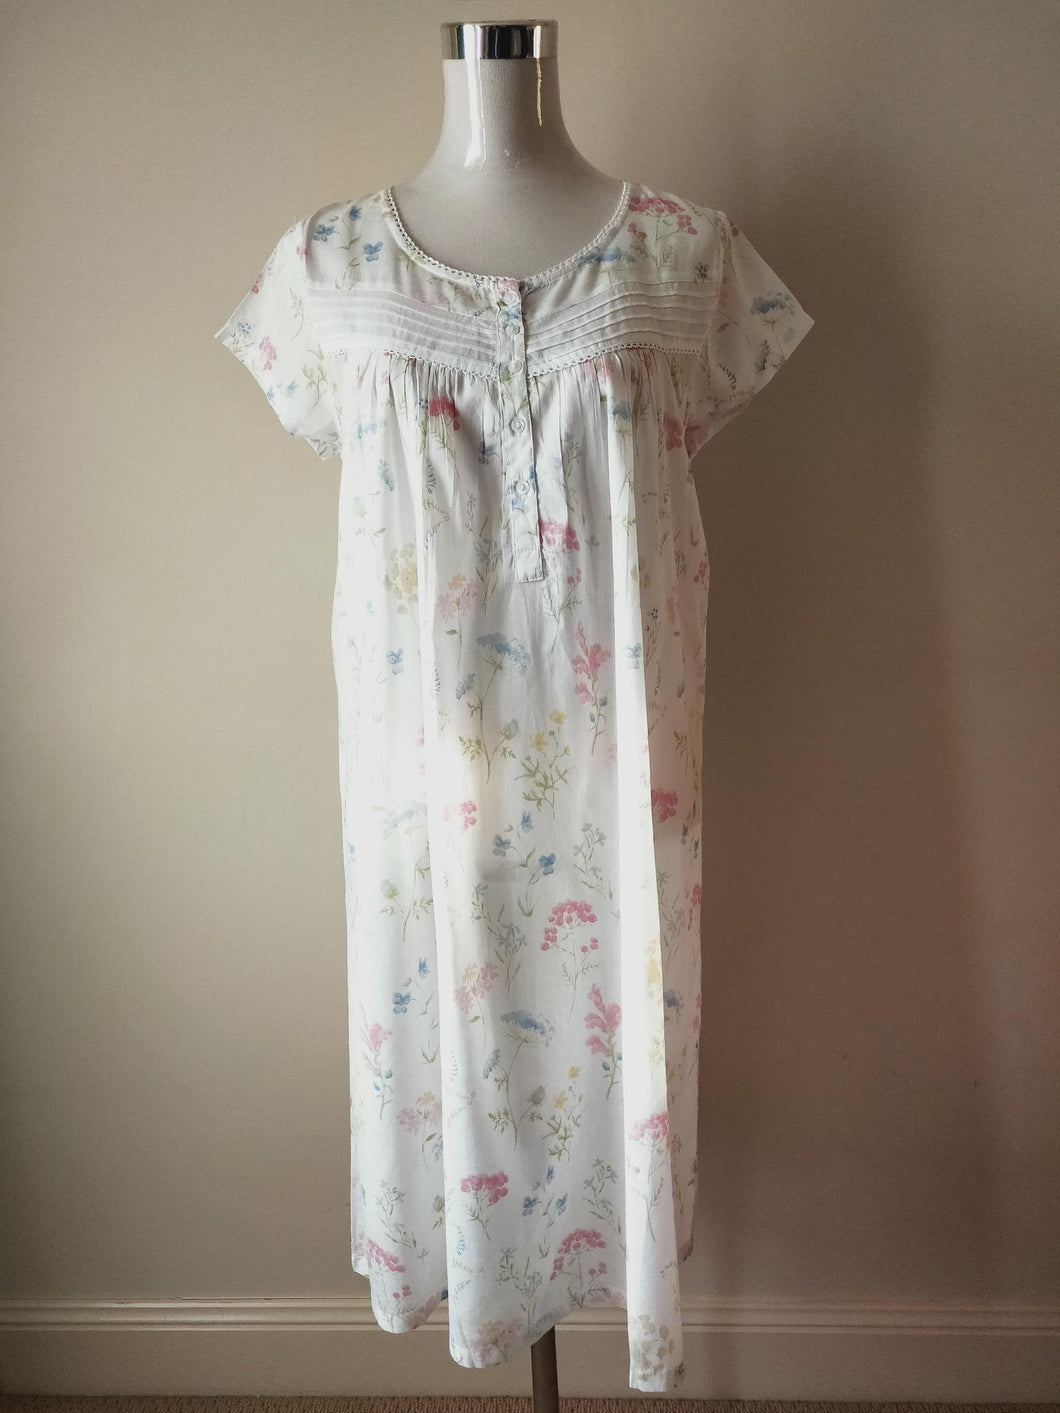 French Country nightwear pure cotton voile nightie Australia FCW124V